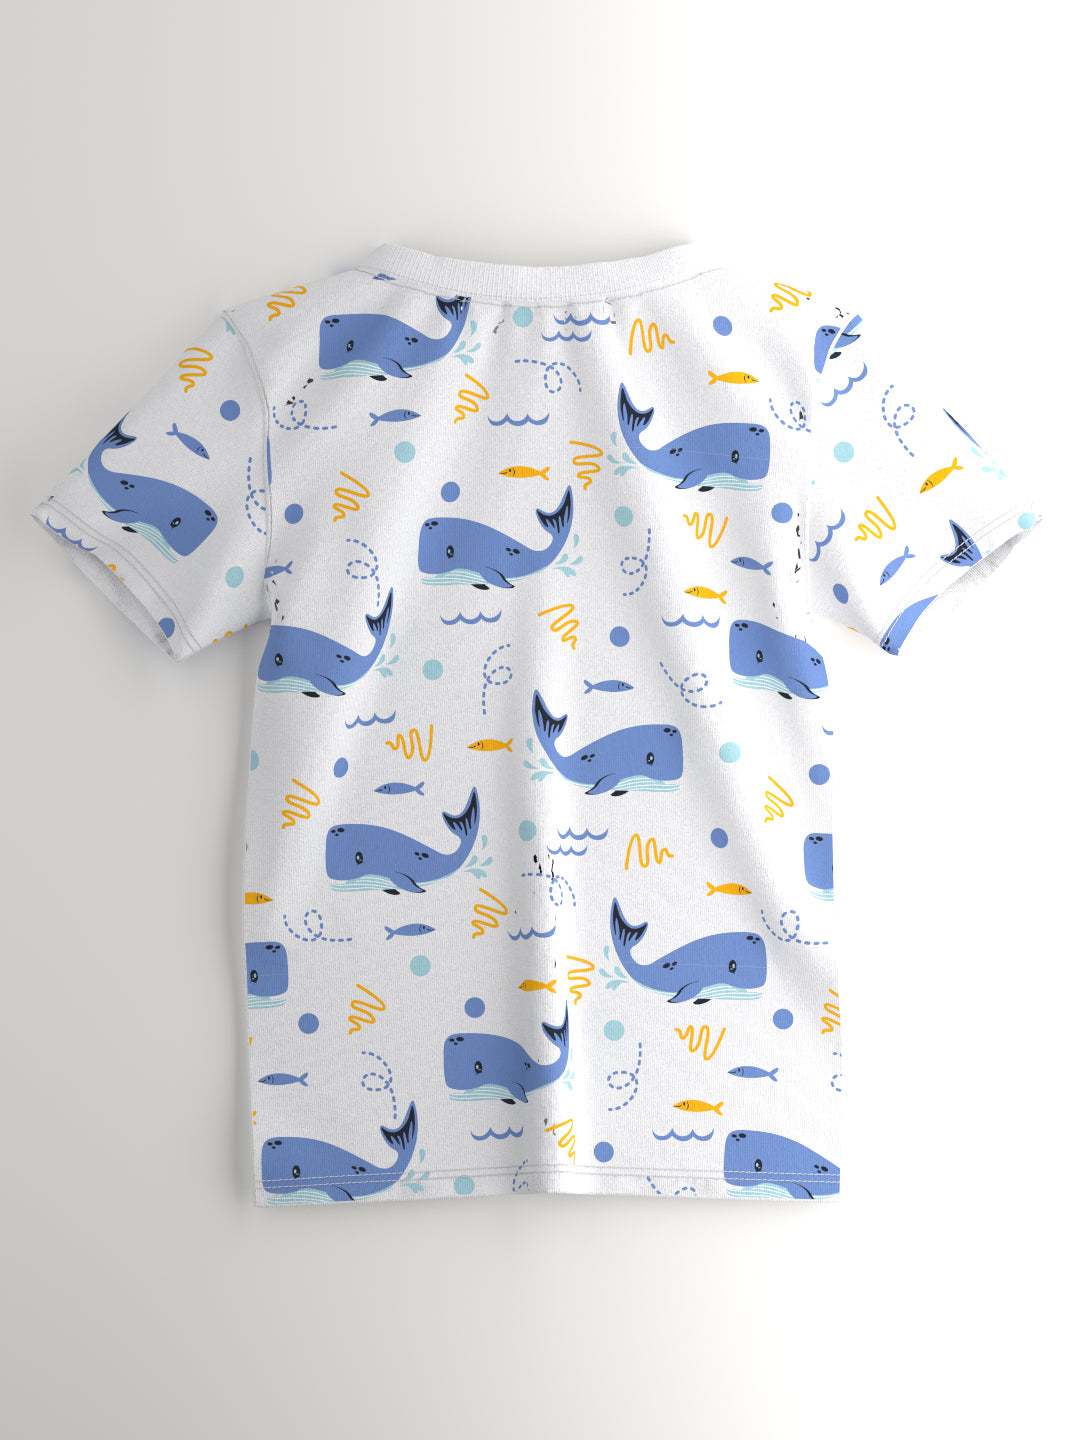 Boys Yellow-White Graphic Printed Half Sleeve Pack of 3 T-Shirt